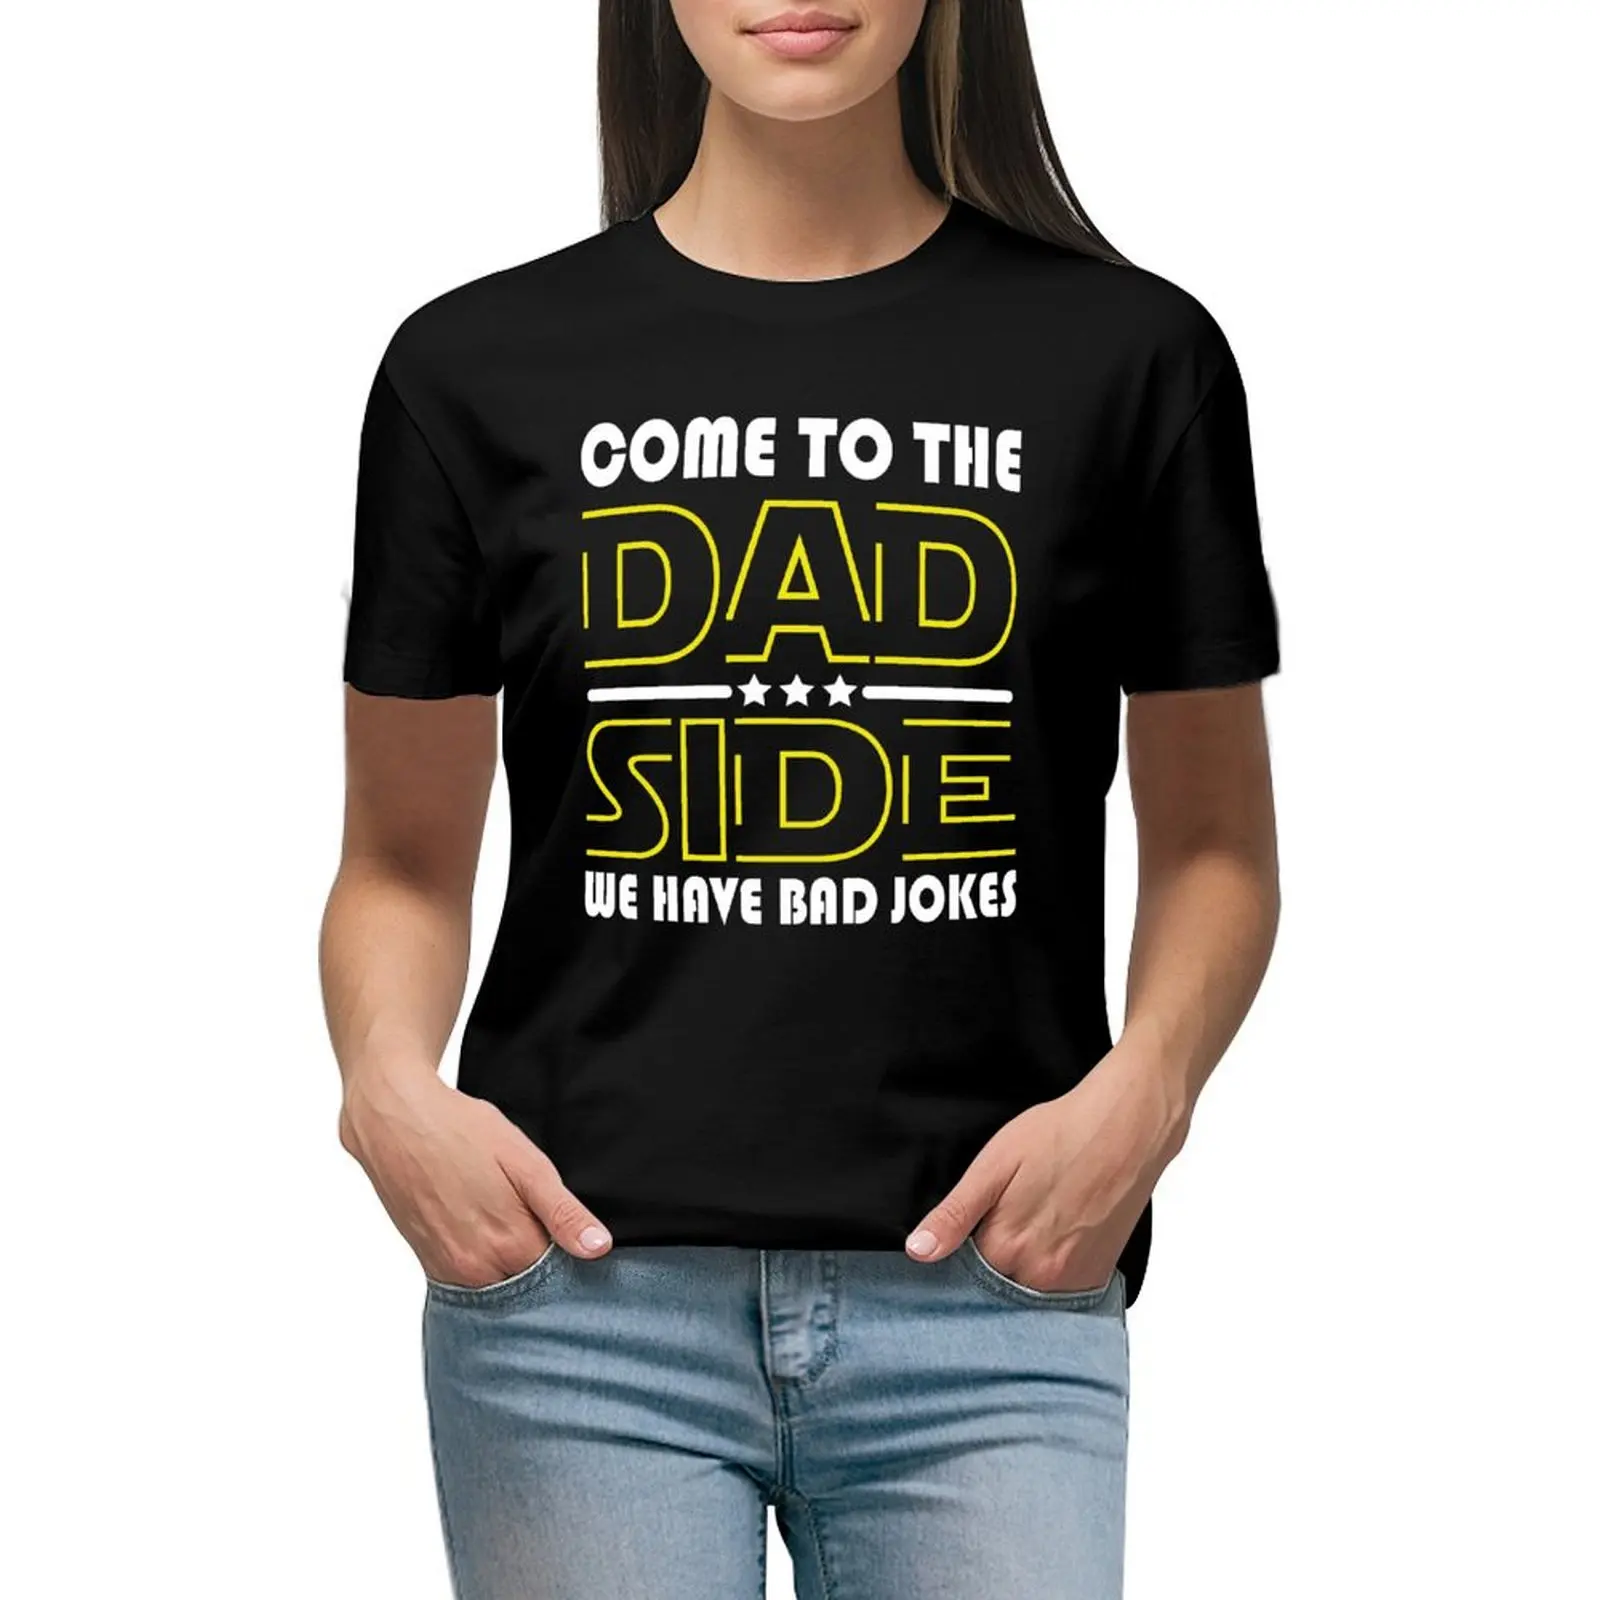 

Come To The Dad Side We Have Bad Jokes,Funny Dad Jokes gift For Father's day T-shirt Blouse funny Woman fashion